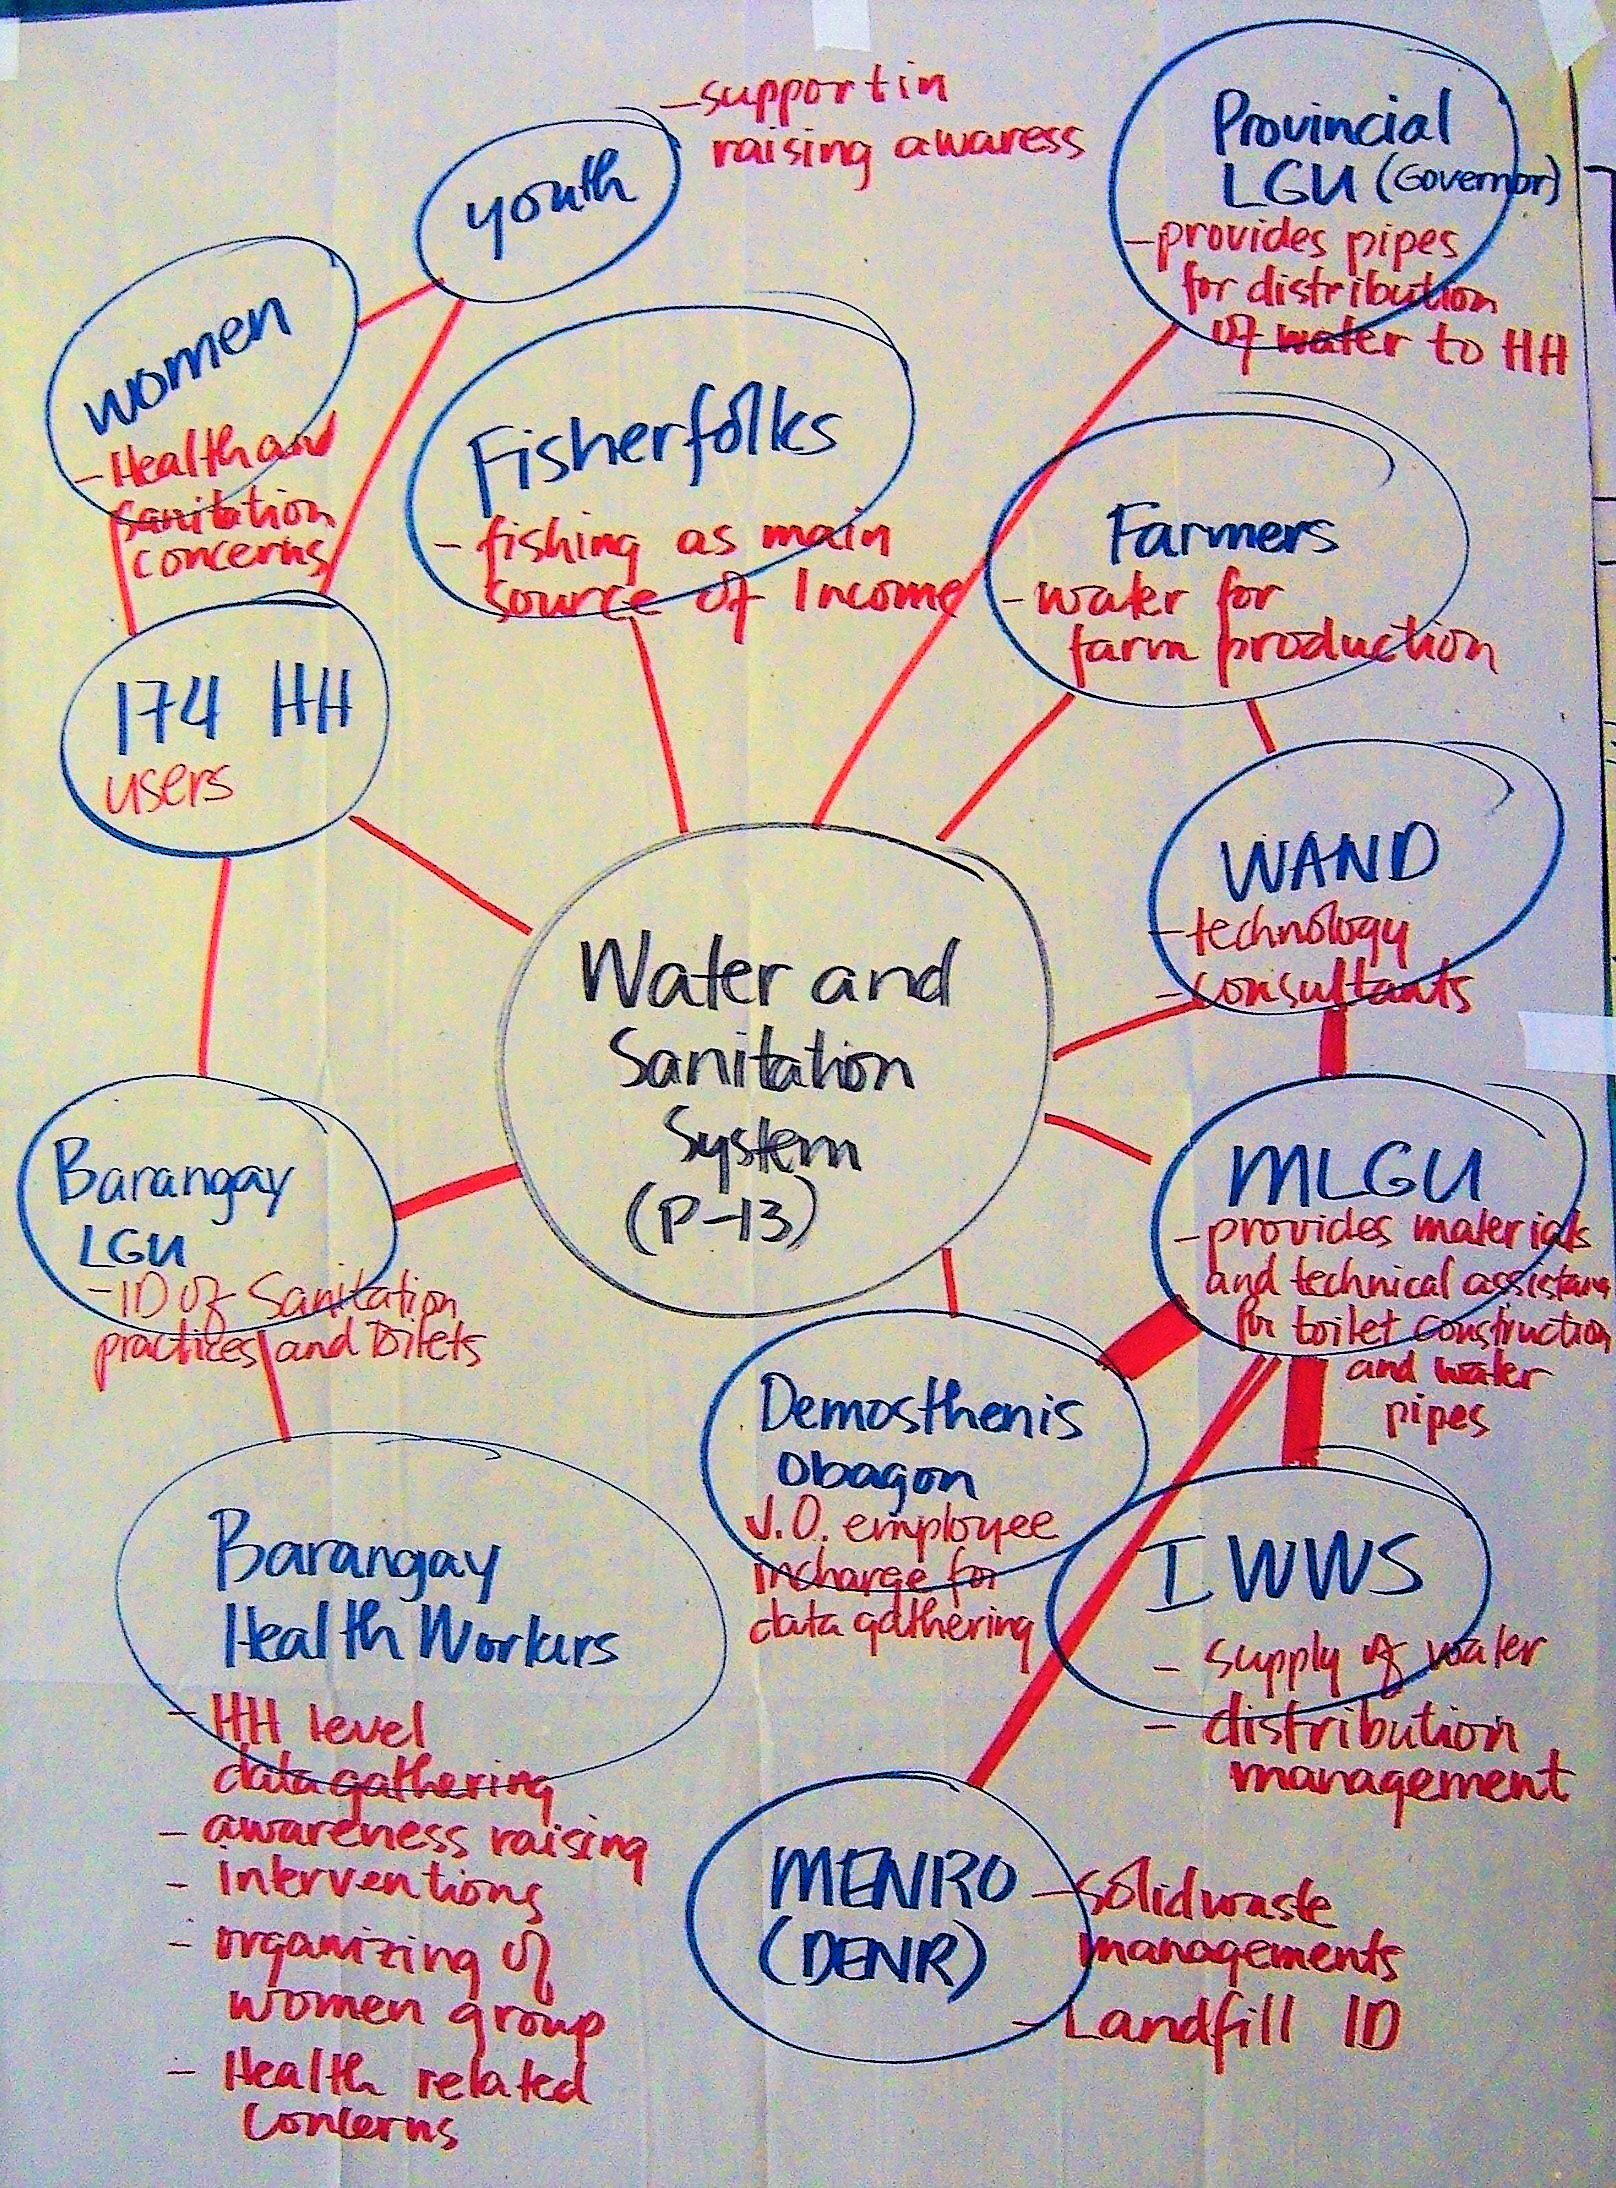 In this example, comments regarding the role of the different stakeholders were added in red colour